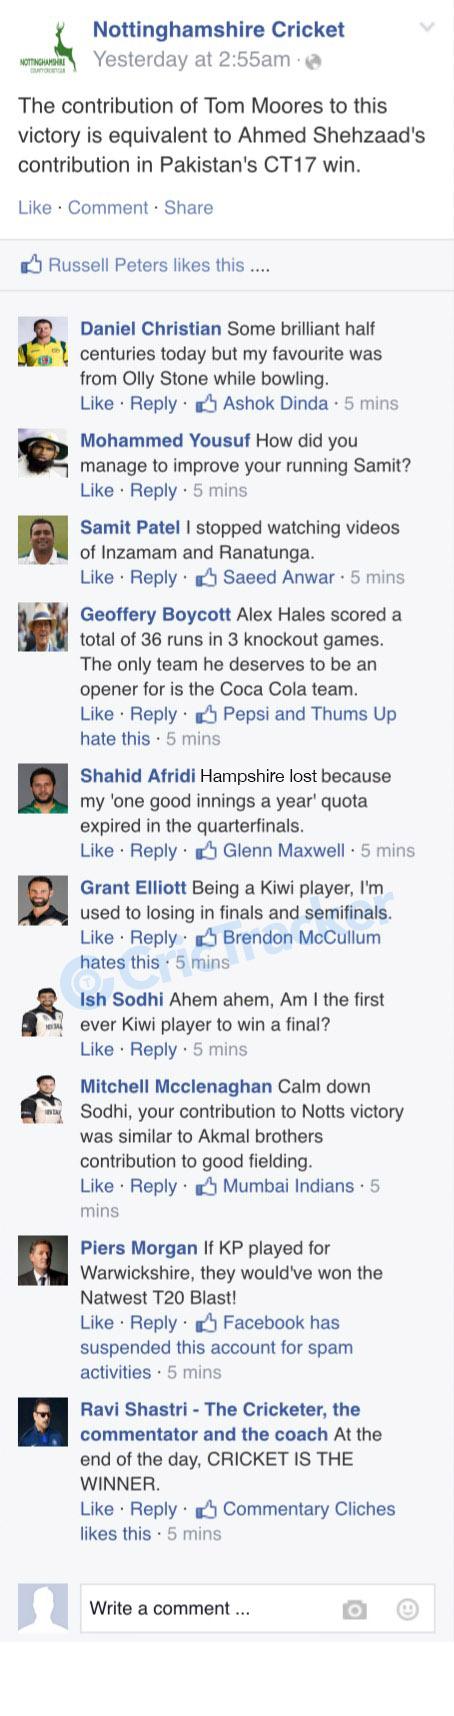 Shahid Afridi reasons his team's defeat in the semi-final.